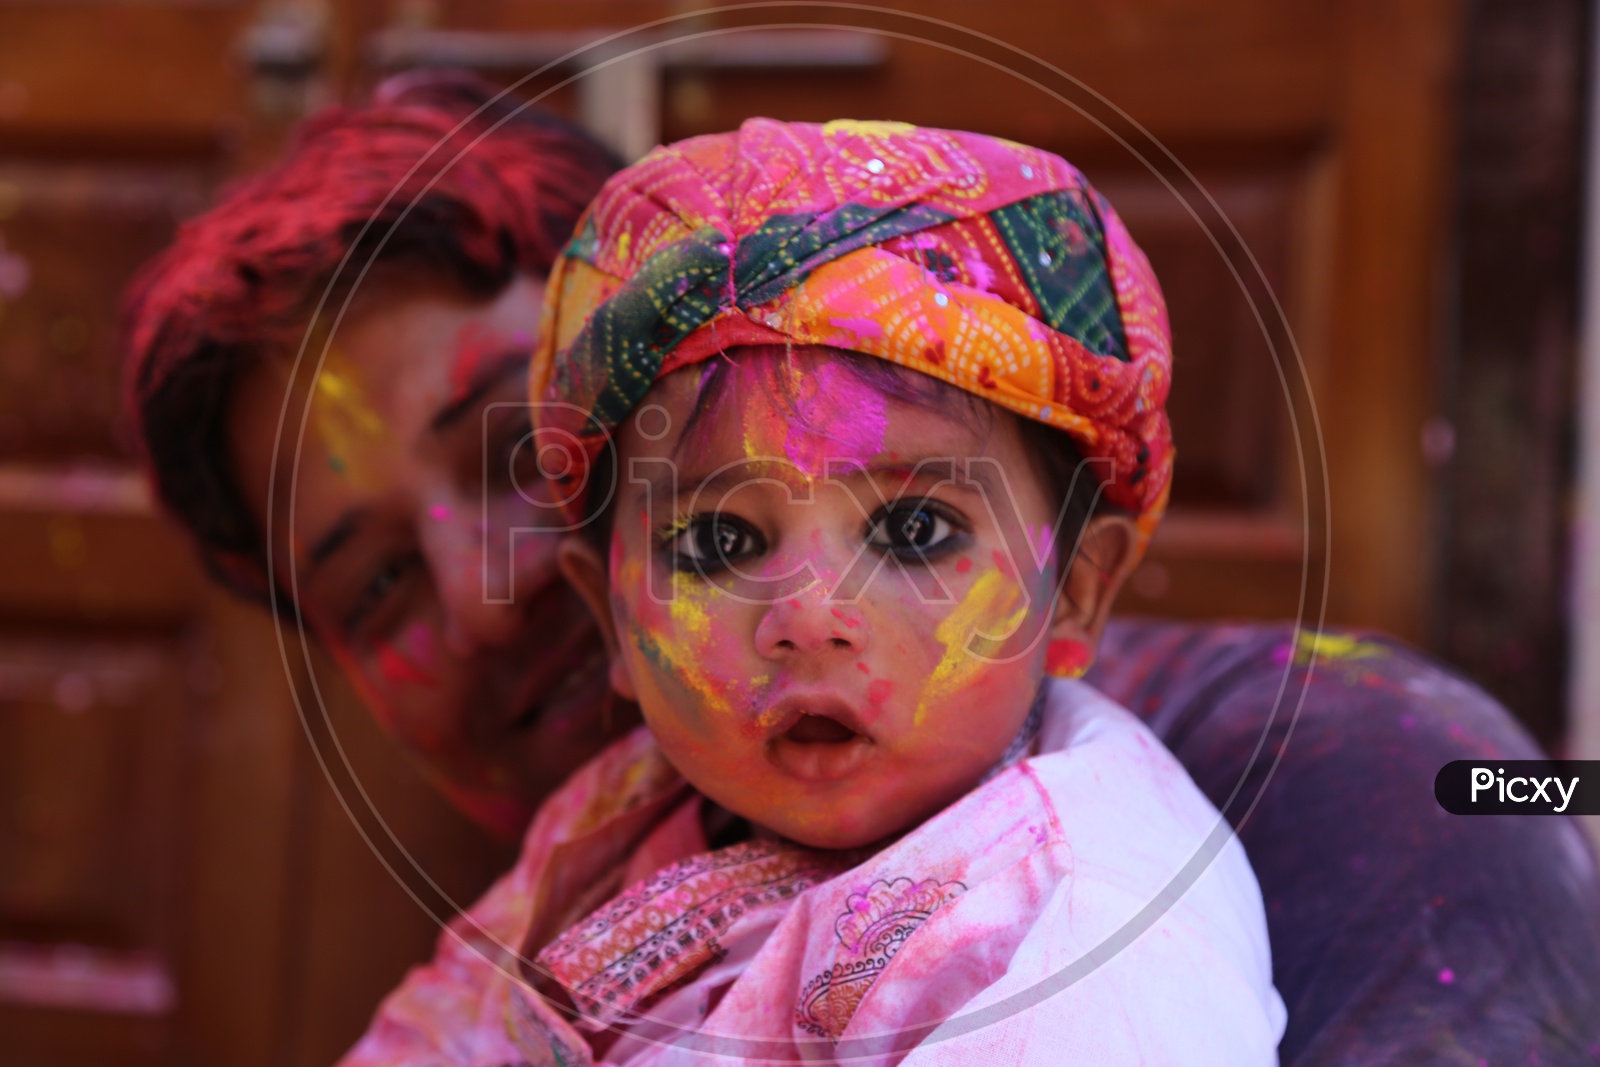 Baby boy with Colors/Colours on face - Holi/Indian Festival - Festival of Colors